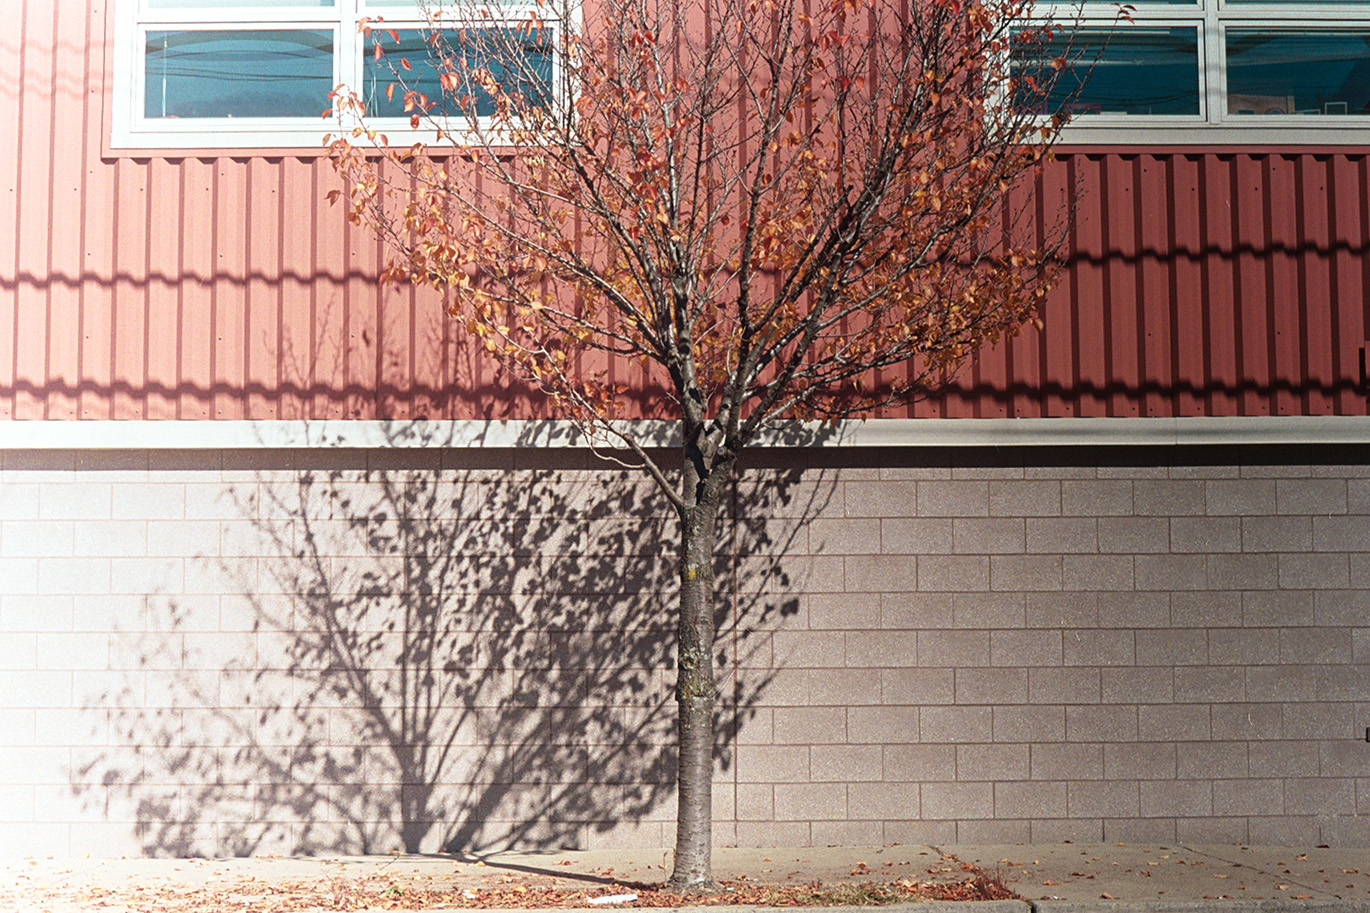 Bare tree in front of red sided and white brick building with two windows and strong shadows.